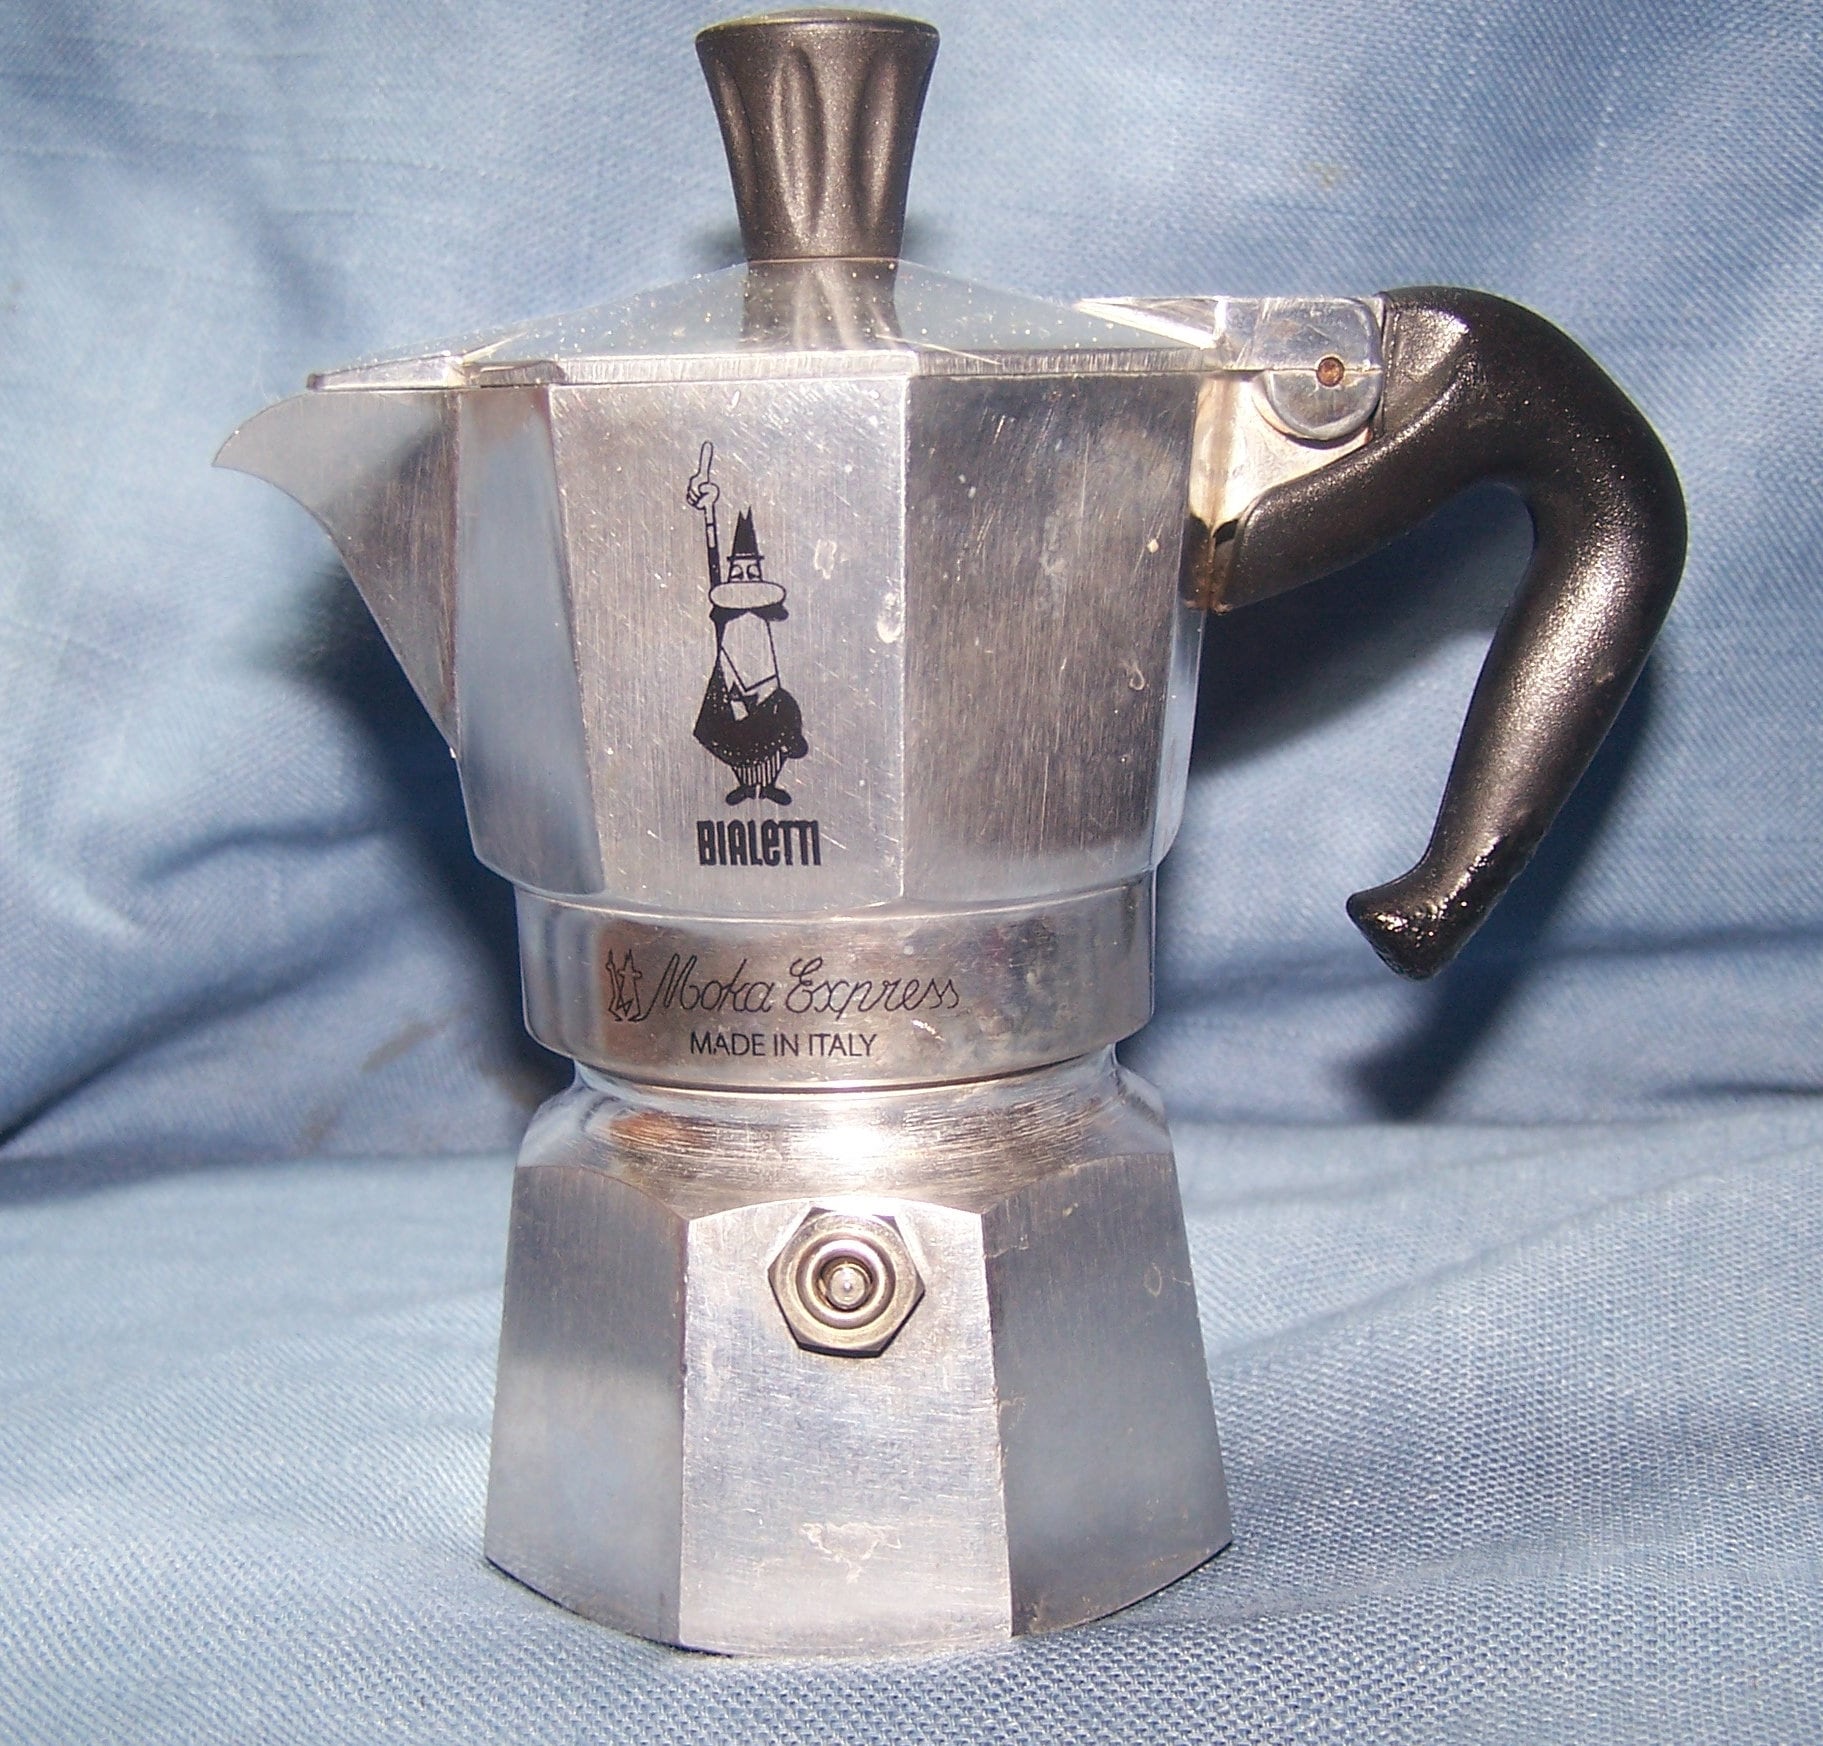 Vintage Bialetti Moka Express 1 Cup Stovetop Espresso Maker Made in Italy  Used